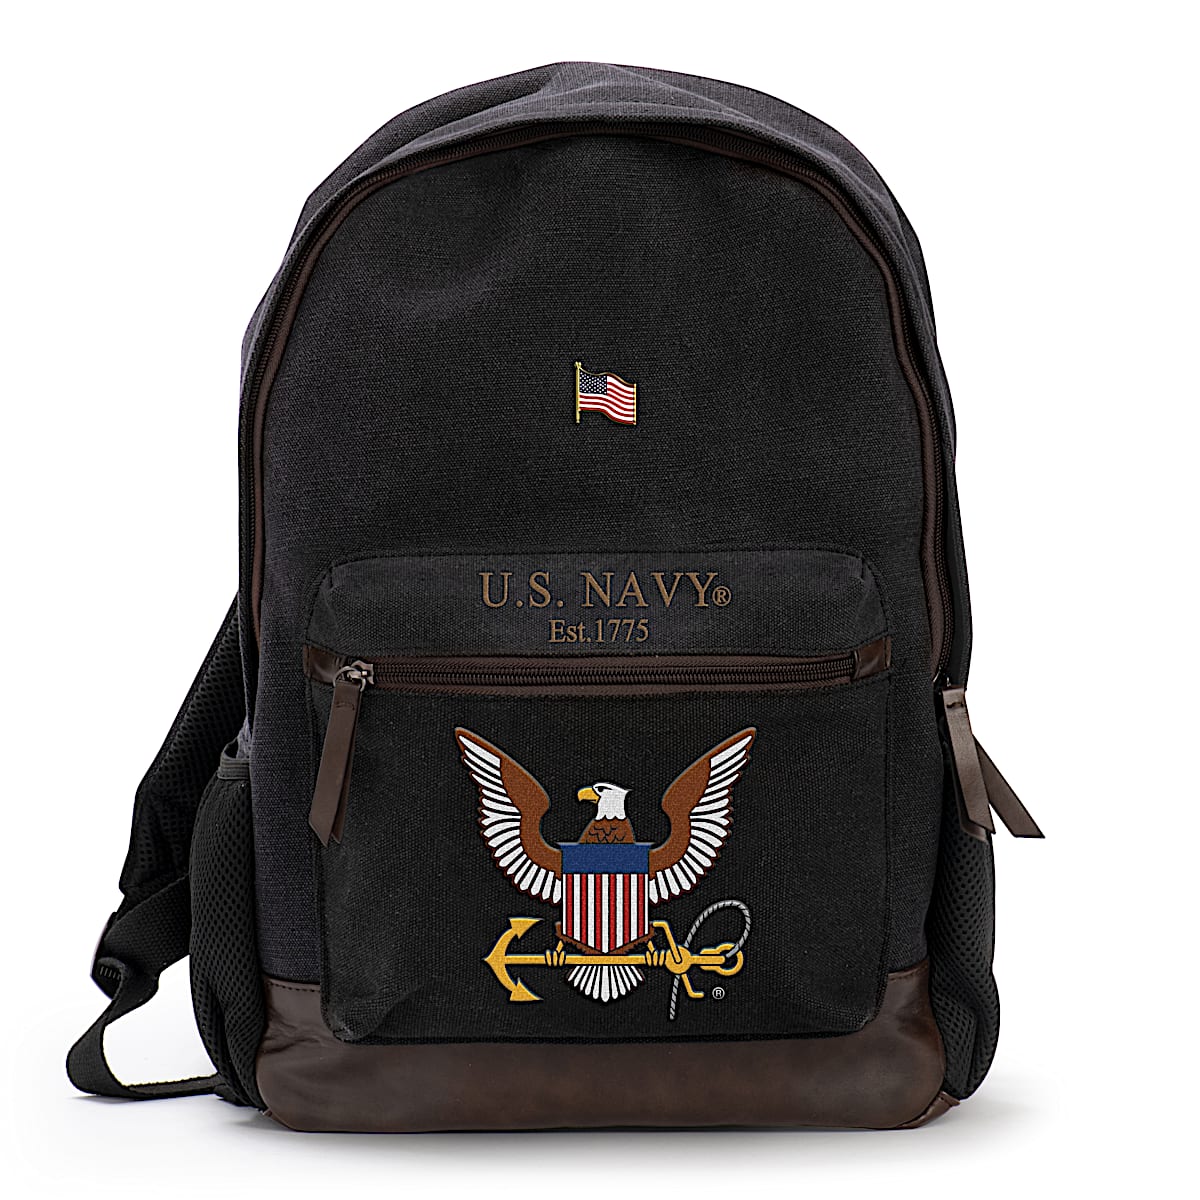 U.S. Navy Black Canvas Backpack Featuring An Embroidered U.S. Navy Emblem &  Brown Faux Leather Accents With A Free American Flag Pin